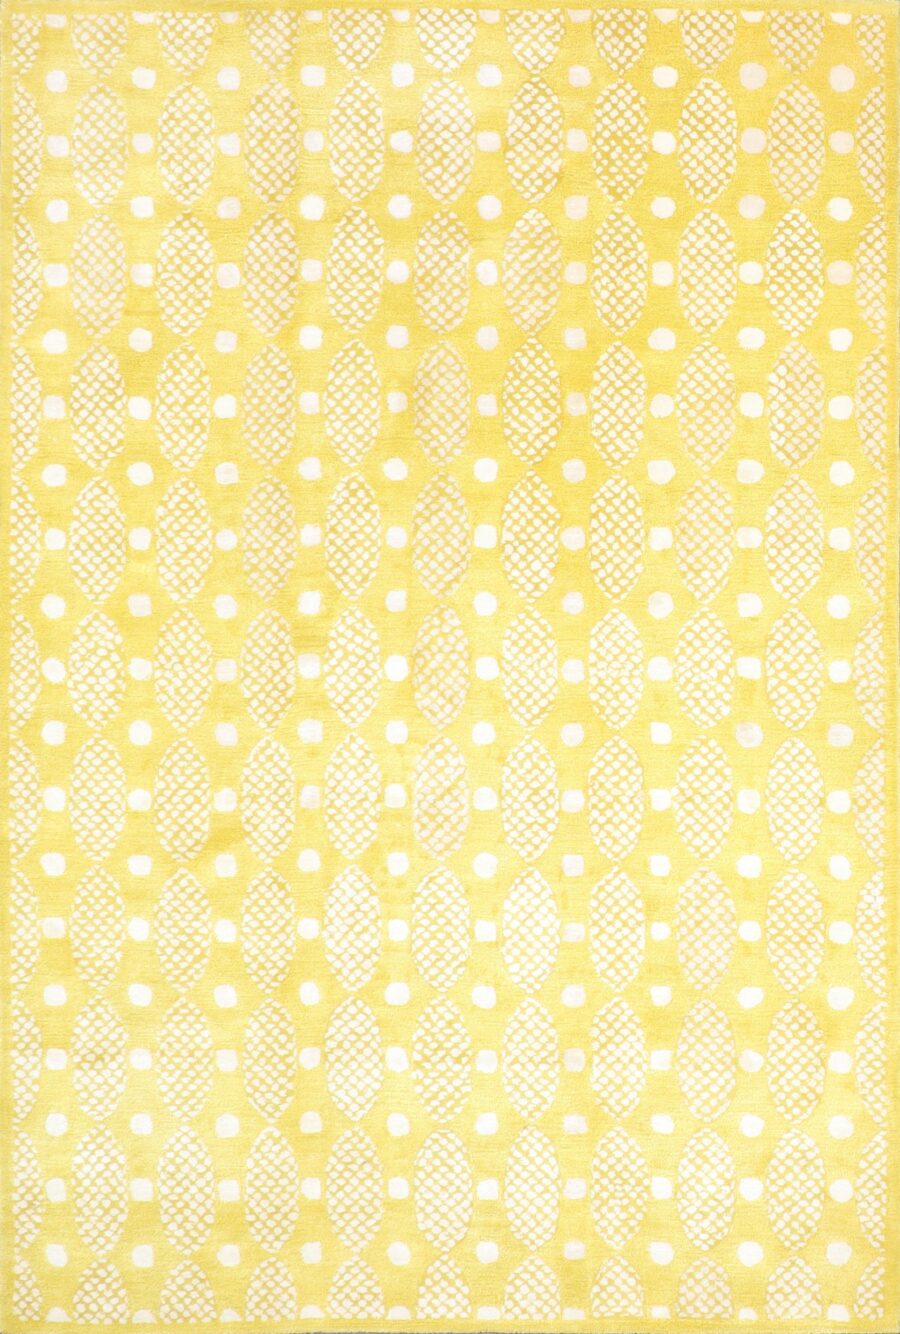 6’x9’ Contemporary Yellow Wool & Silk Hand-Tufted Rug - Direct Rug Import | Rugs in Chicago, Indiana,South Bend,Granger